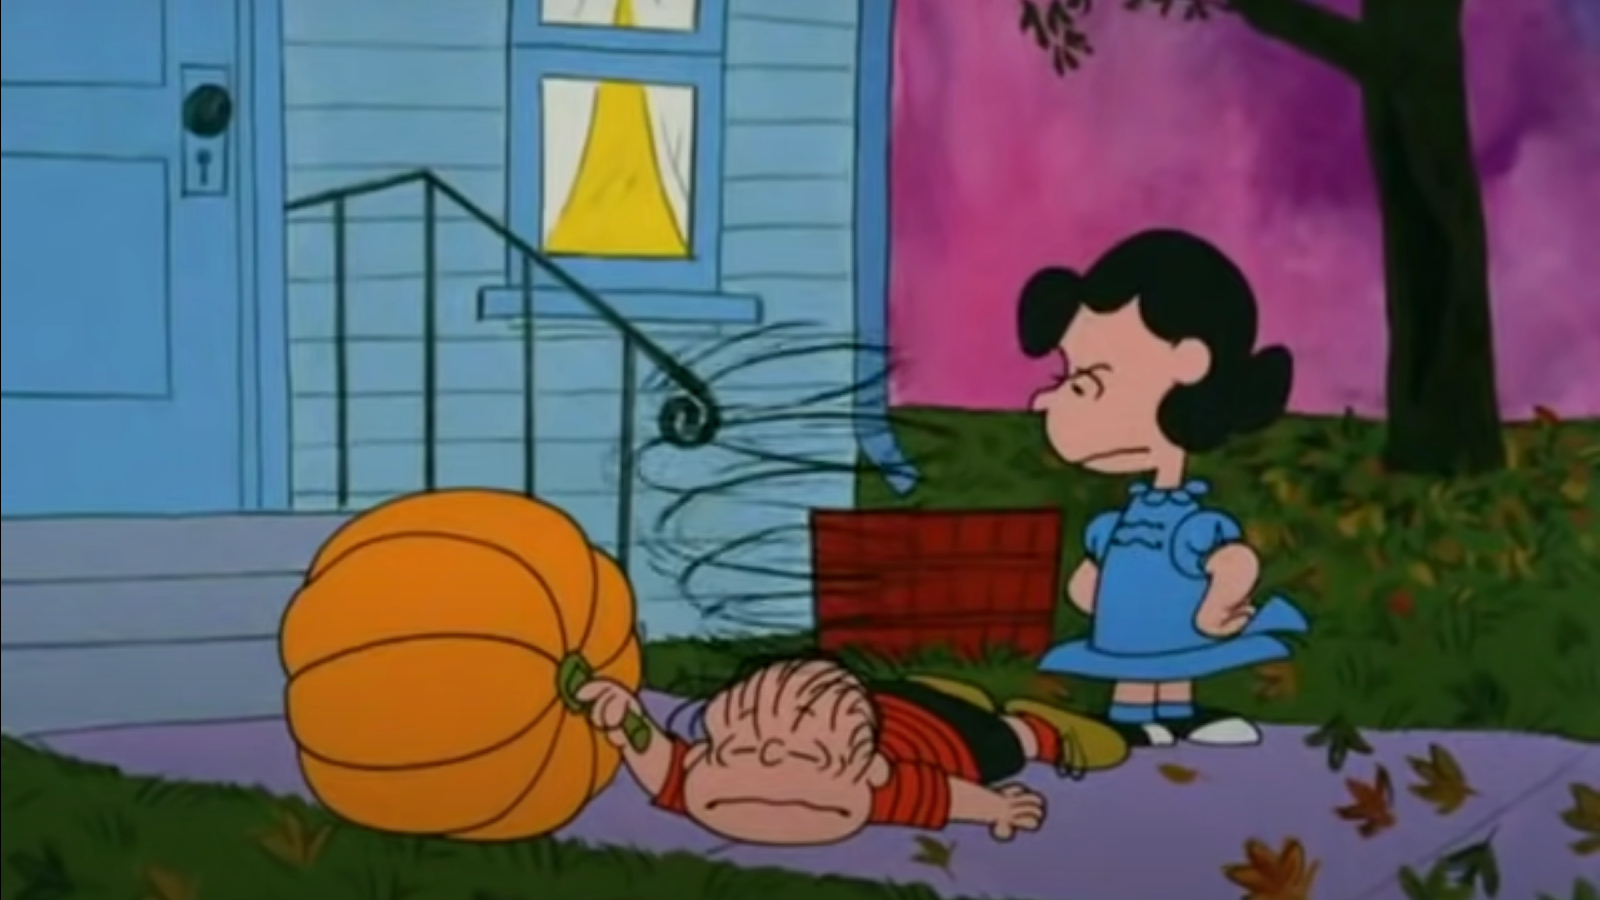 How to Watch ‘It’s the Great Pumpkin, Charlie Brown’ This Year